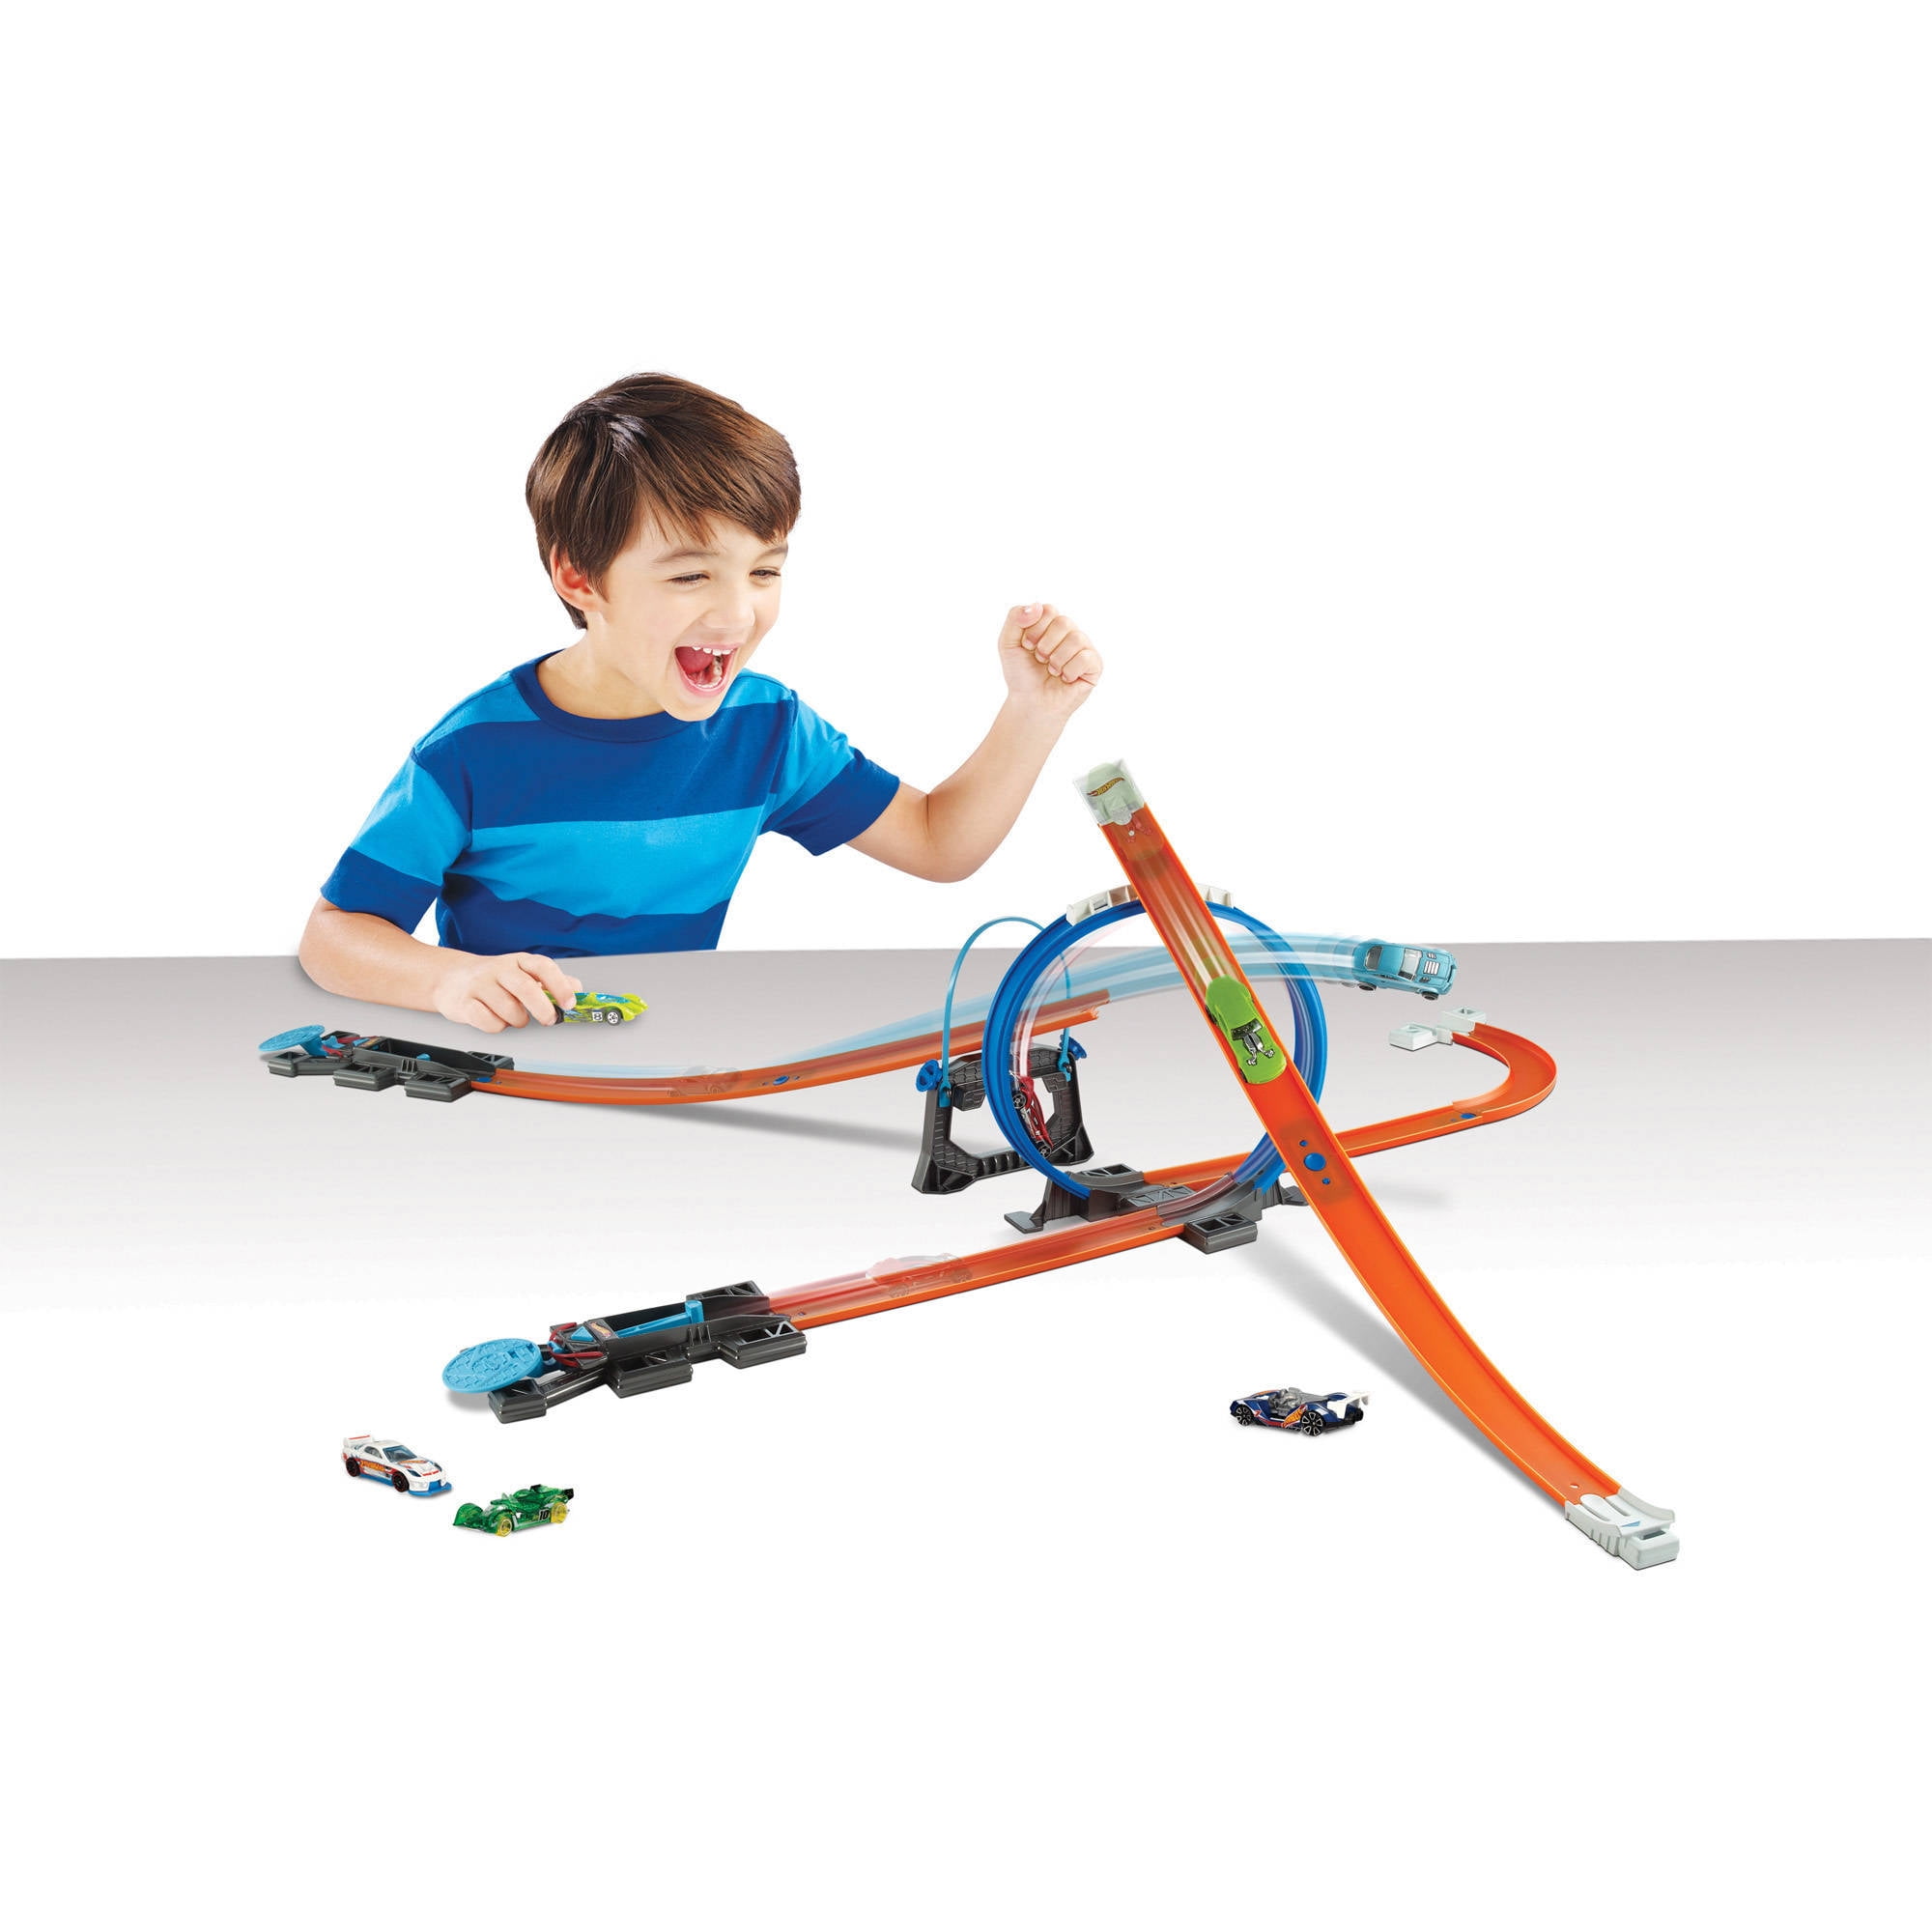 NEW! Hot Wheels Speedy Pizza Action Track Builder Playset by Mattel 